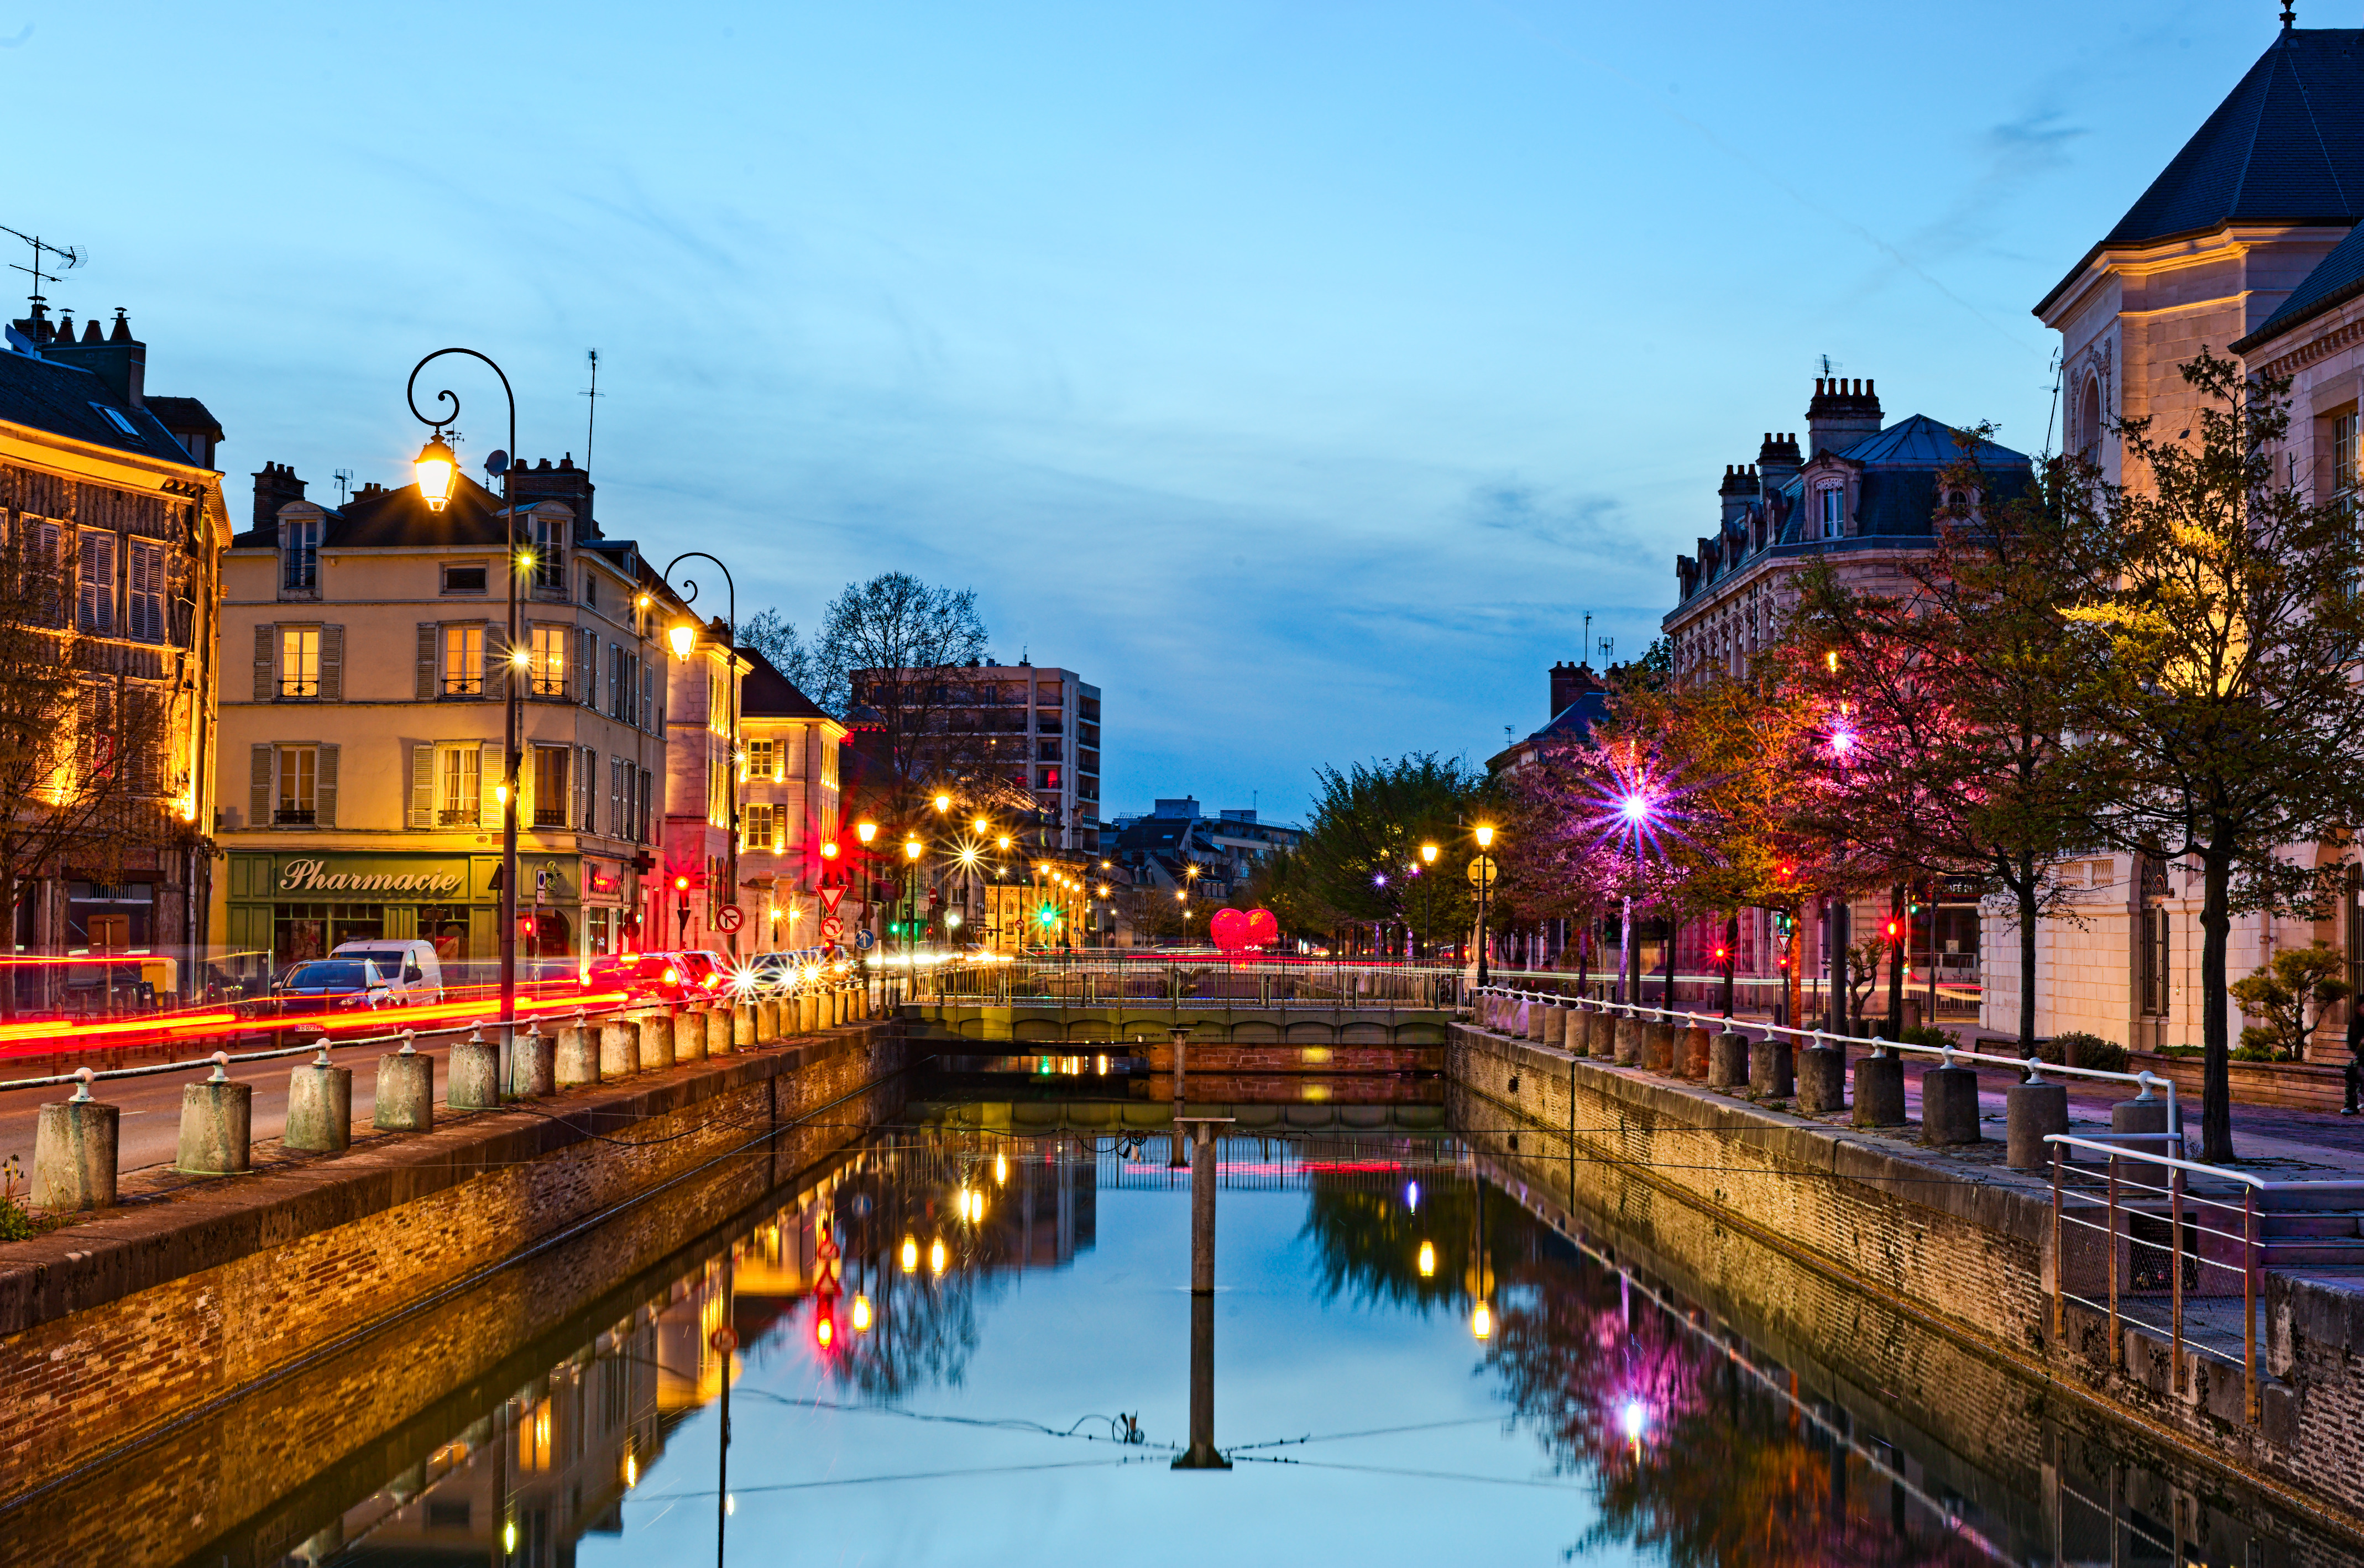 General 4276x2836 photography long exposure city lights evening water France street light city street canal reflection lamp road sign building sky